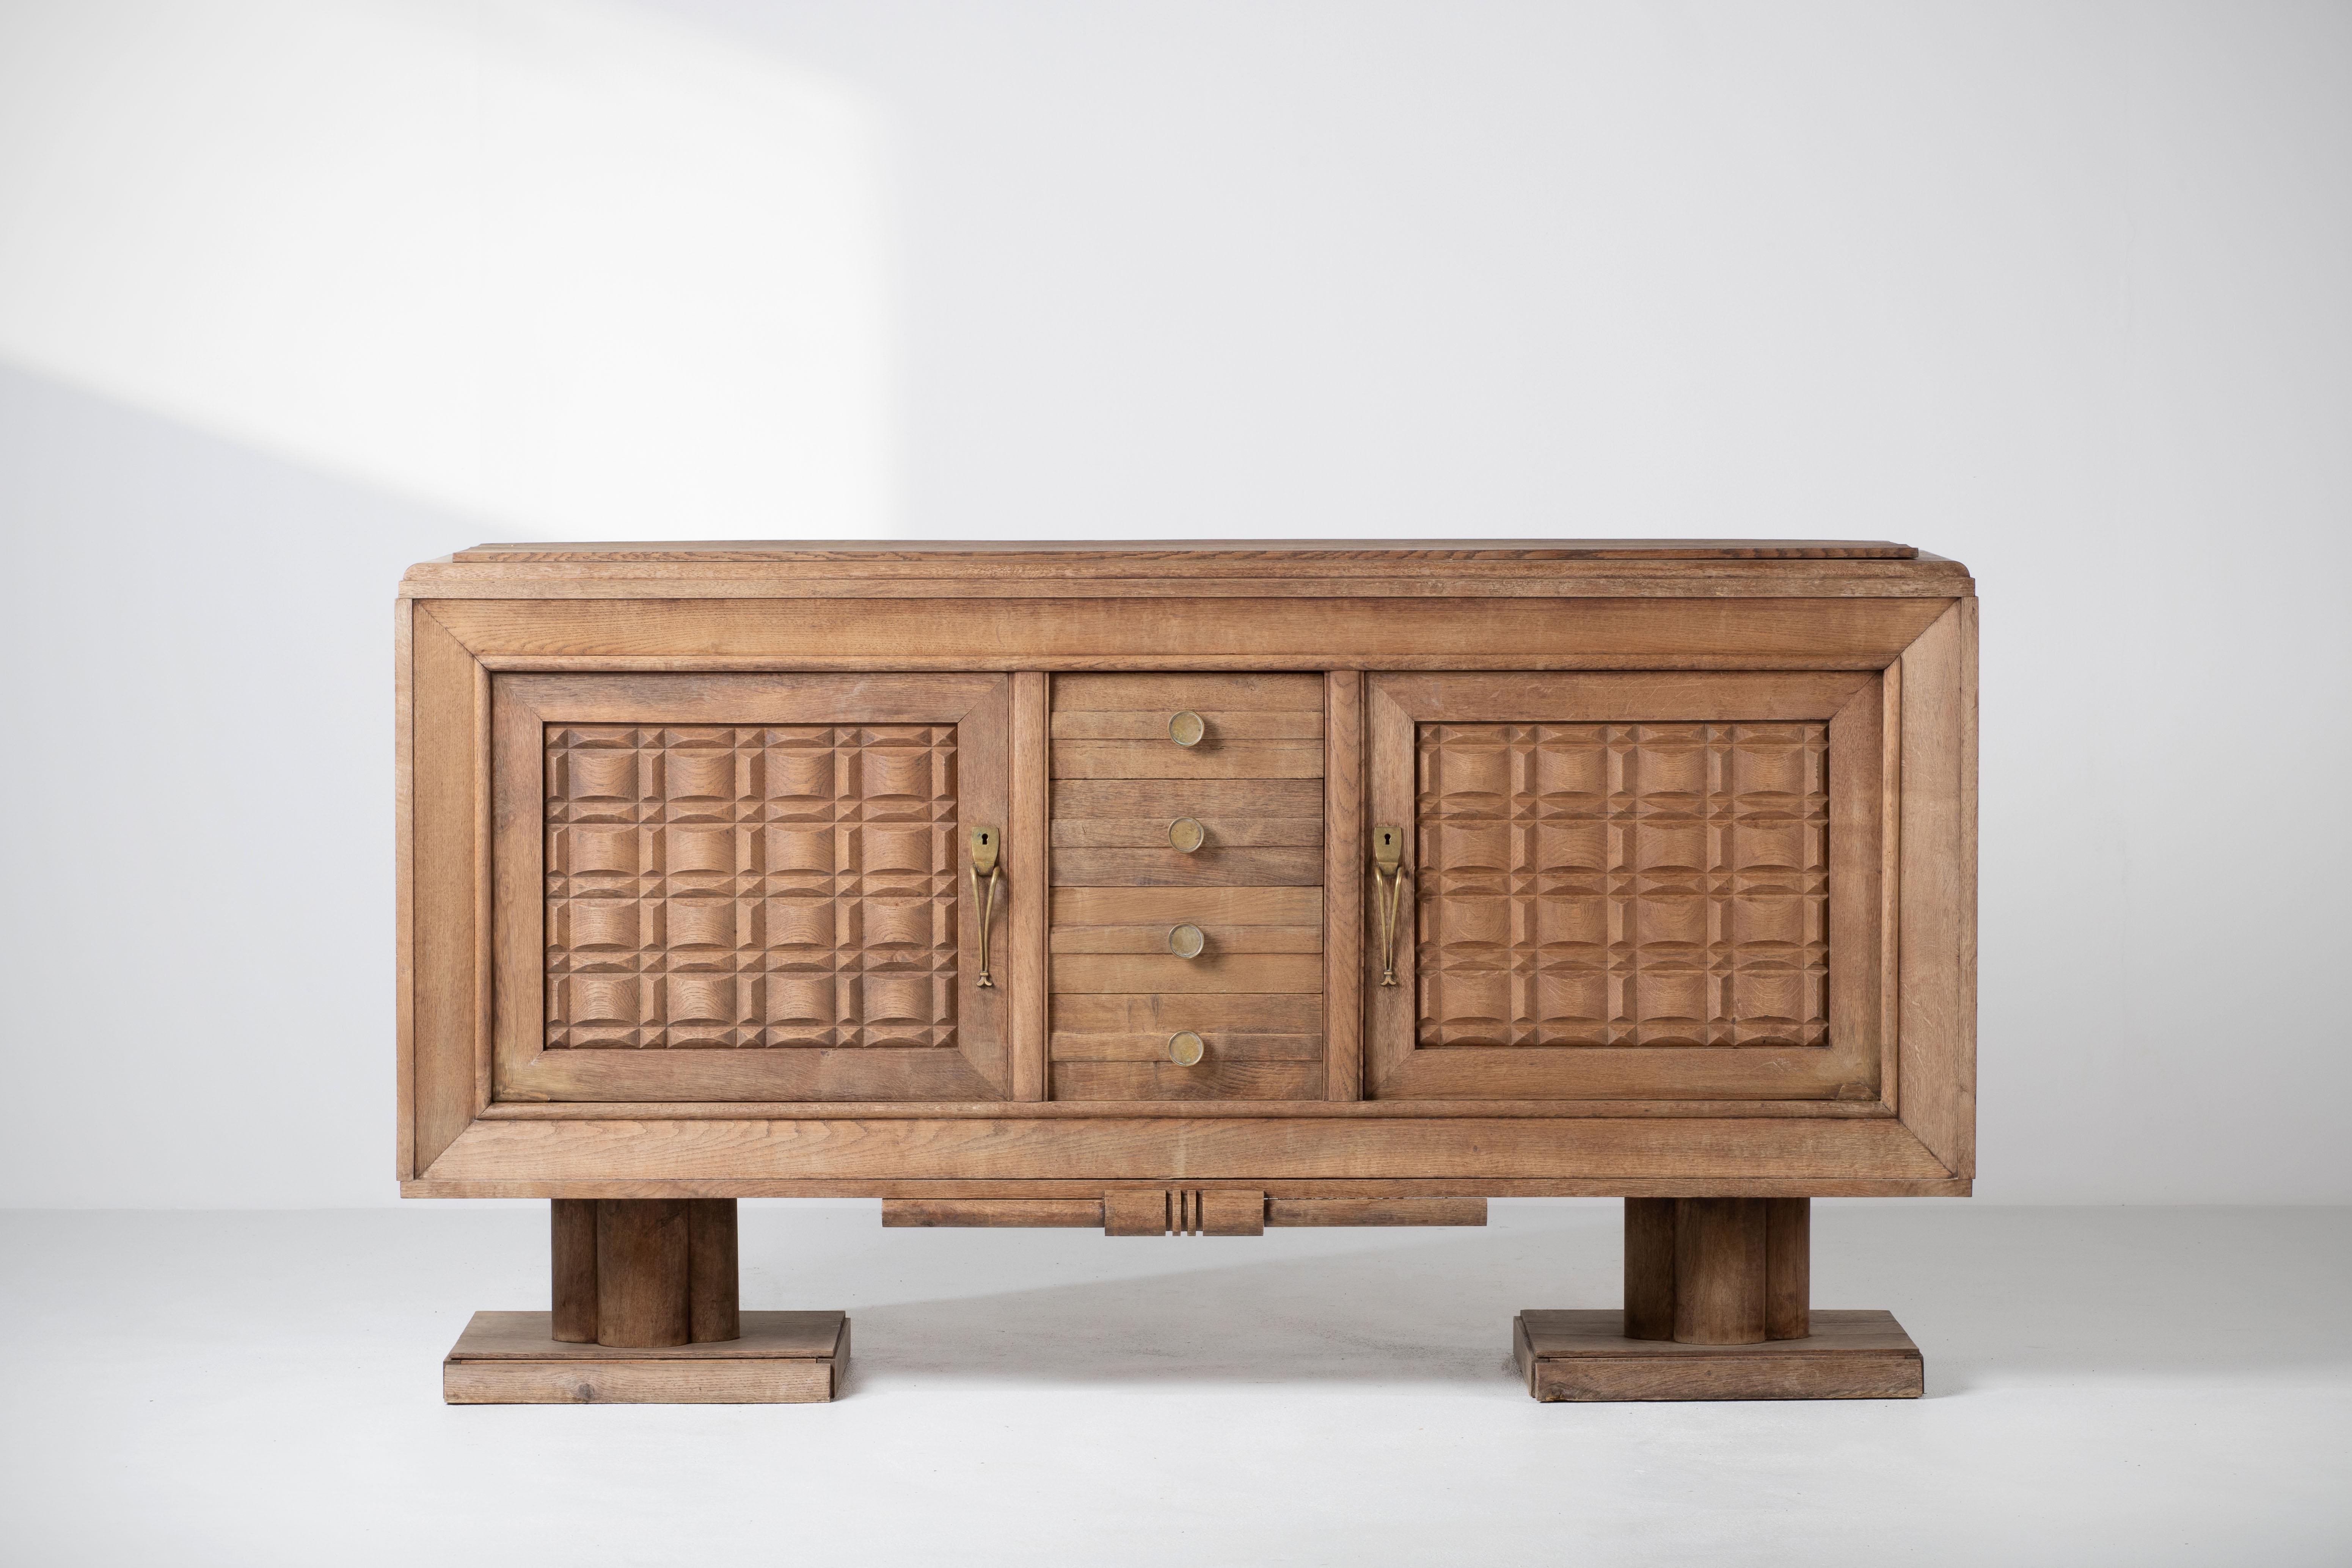 Credenza, solid oak, France, 1940s, attributed to Charles Dudouyt.
Large Art Deco Brutalist sideboard in a bleached finish. 
The credenza consists of two storage facilities and three drawers. It is covered with very detailed designed door panels.